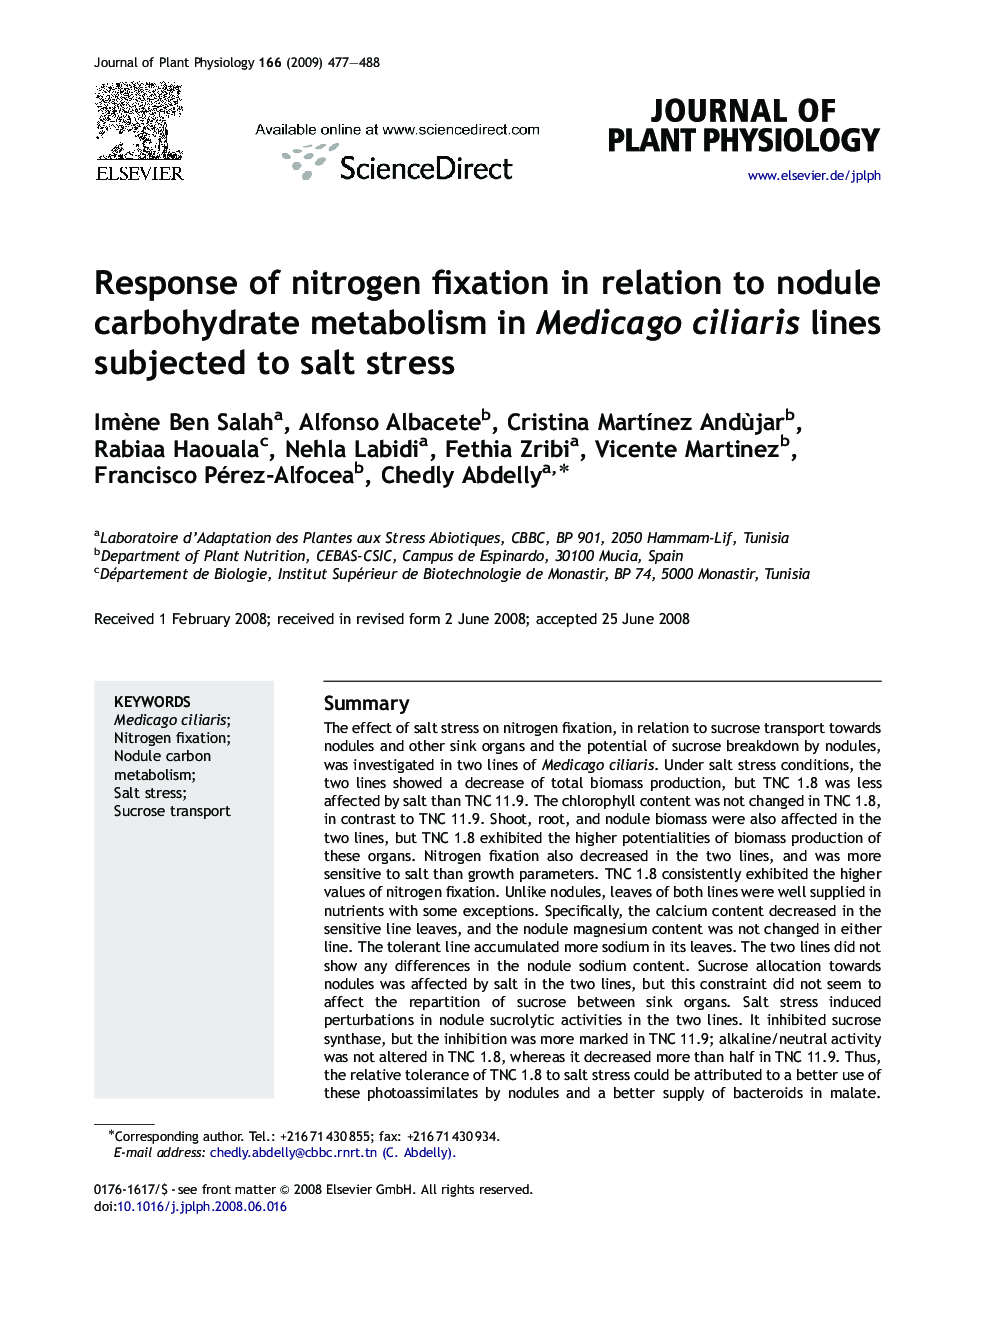 Response of nitrogen fixation in relation to nodule carbohydrate metabolism in Medicago ciliaris lines subjected to salt stress